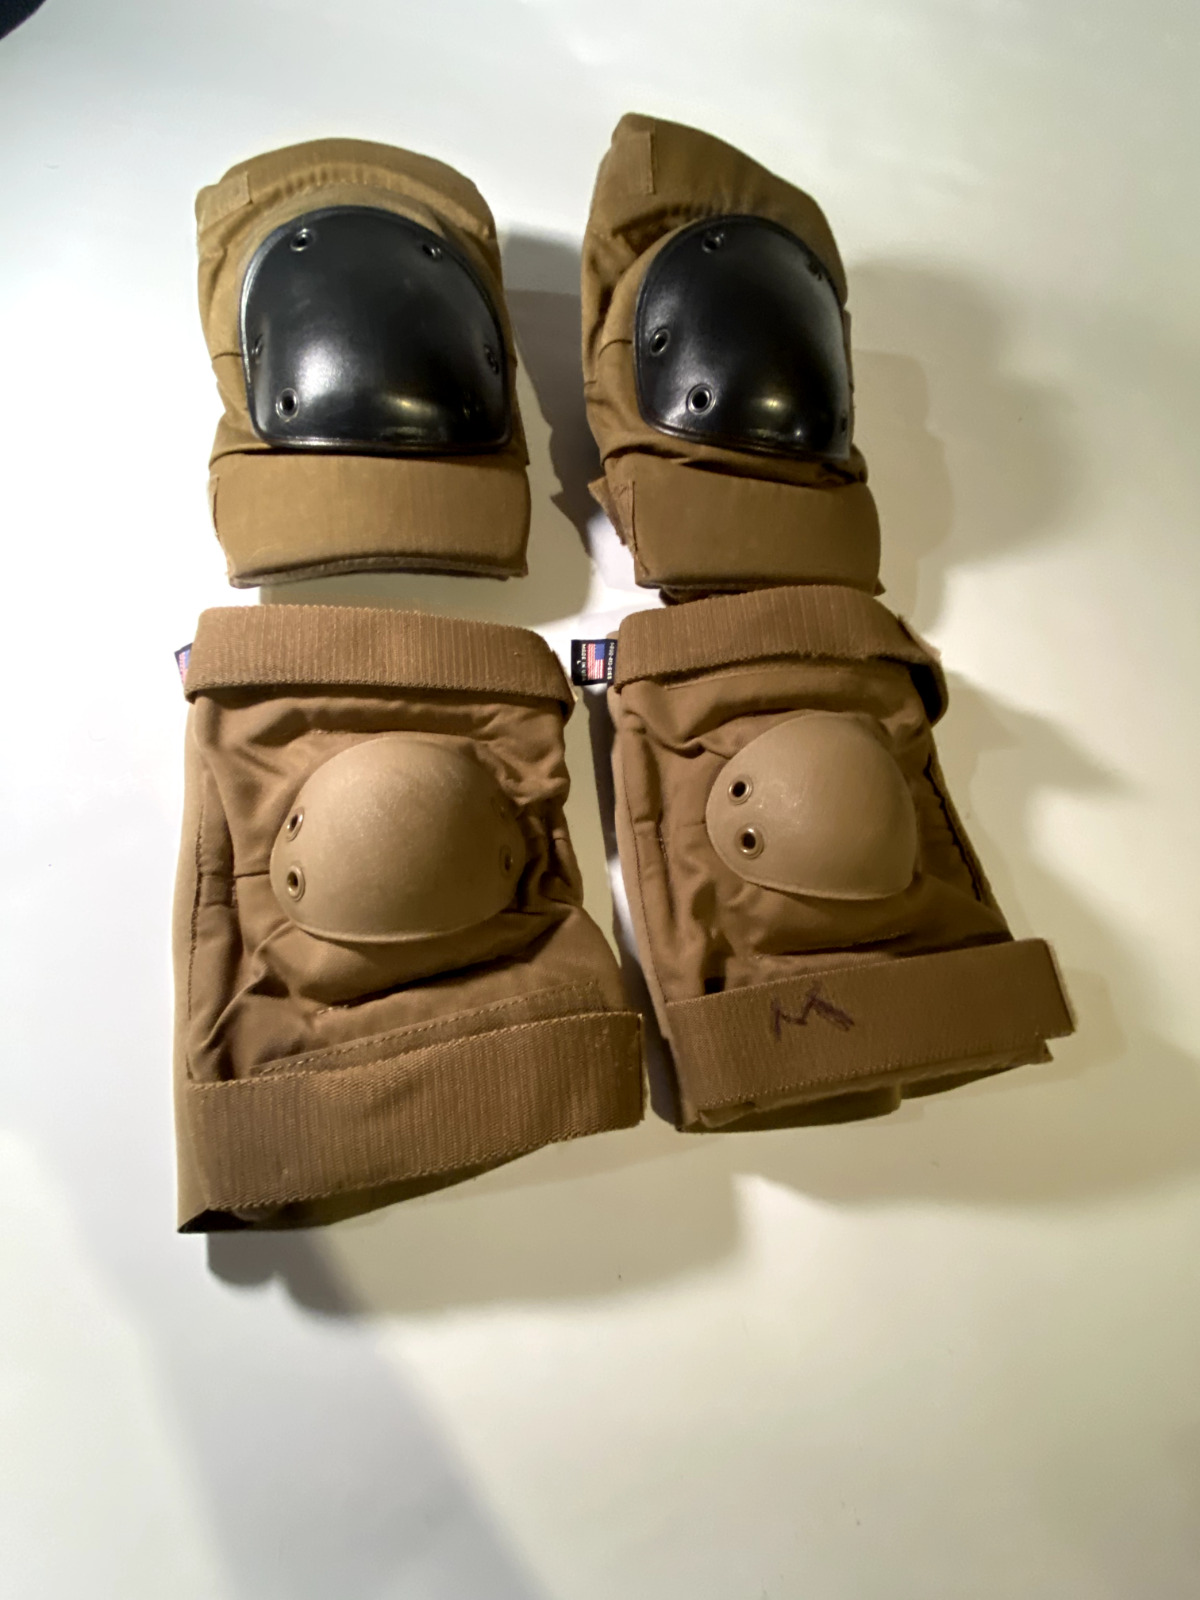 US Military Army Knee & Elbow Pads Coyote Brown / Black - Size Large